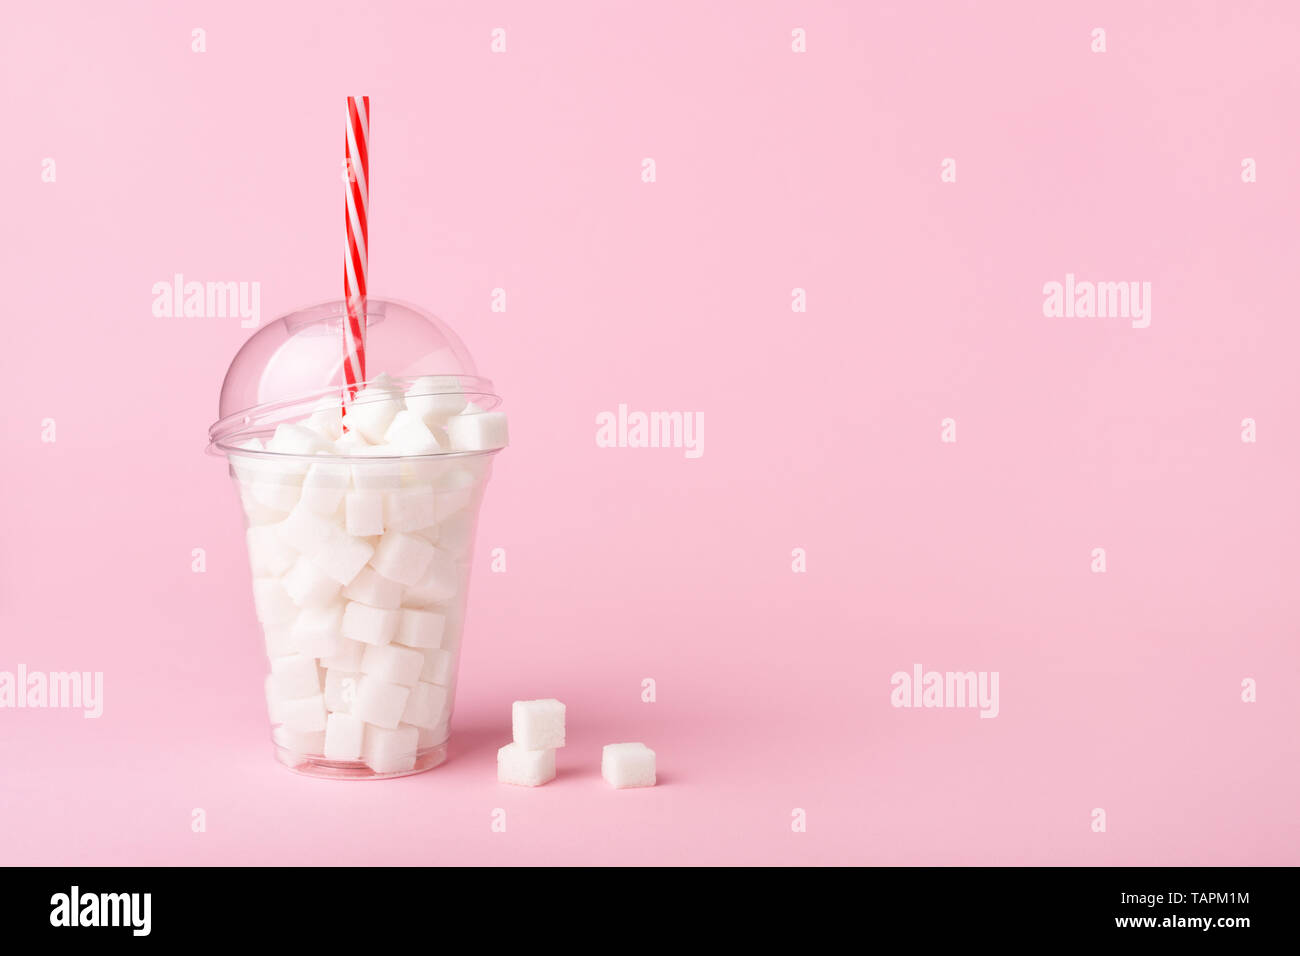 Shake glass with straw full of sugar cubes on pastel pink background. Unhealthy diet concept. Minimal, copy space, side view. Stock Photo